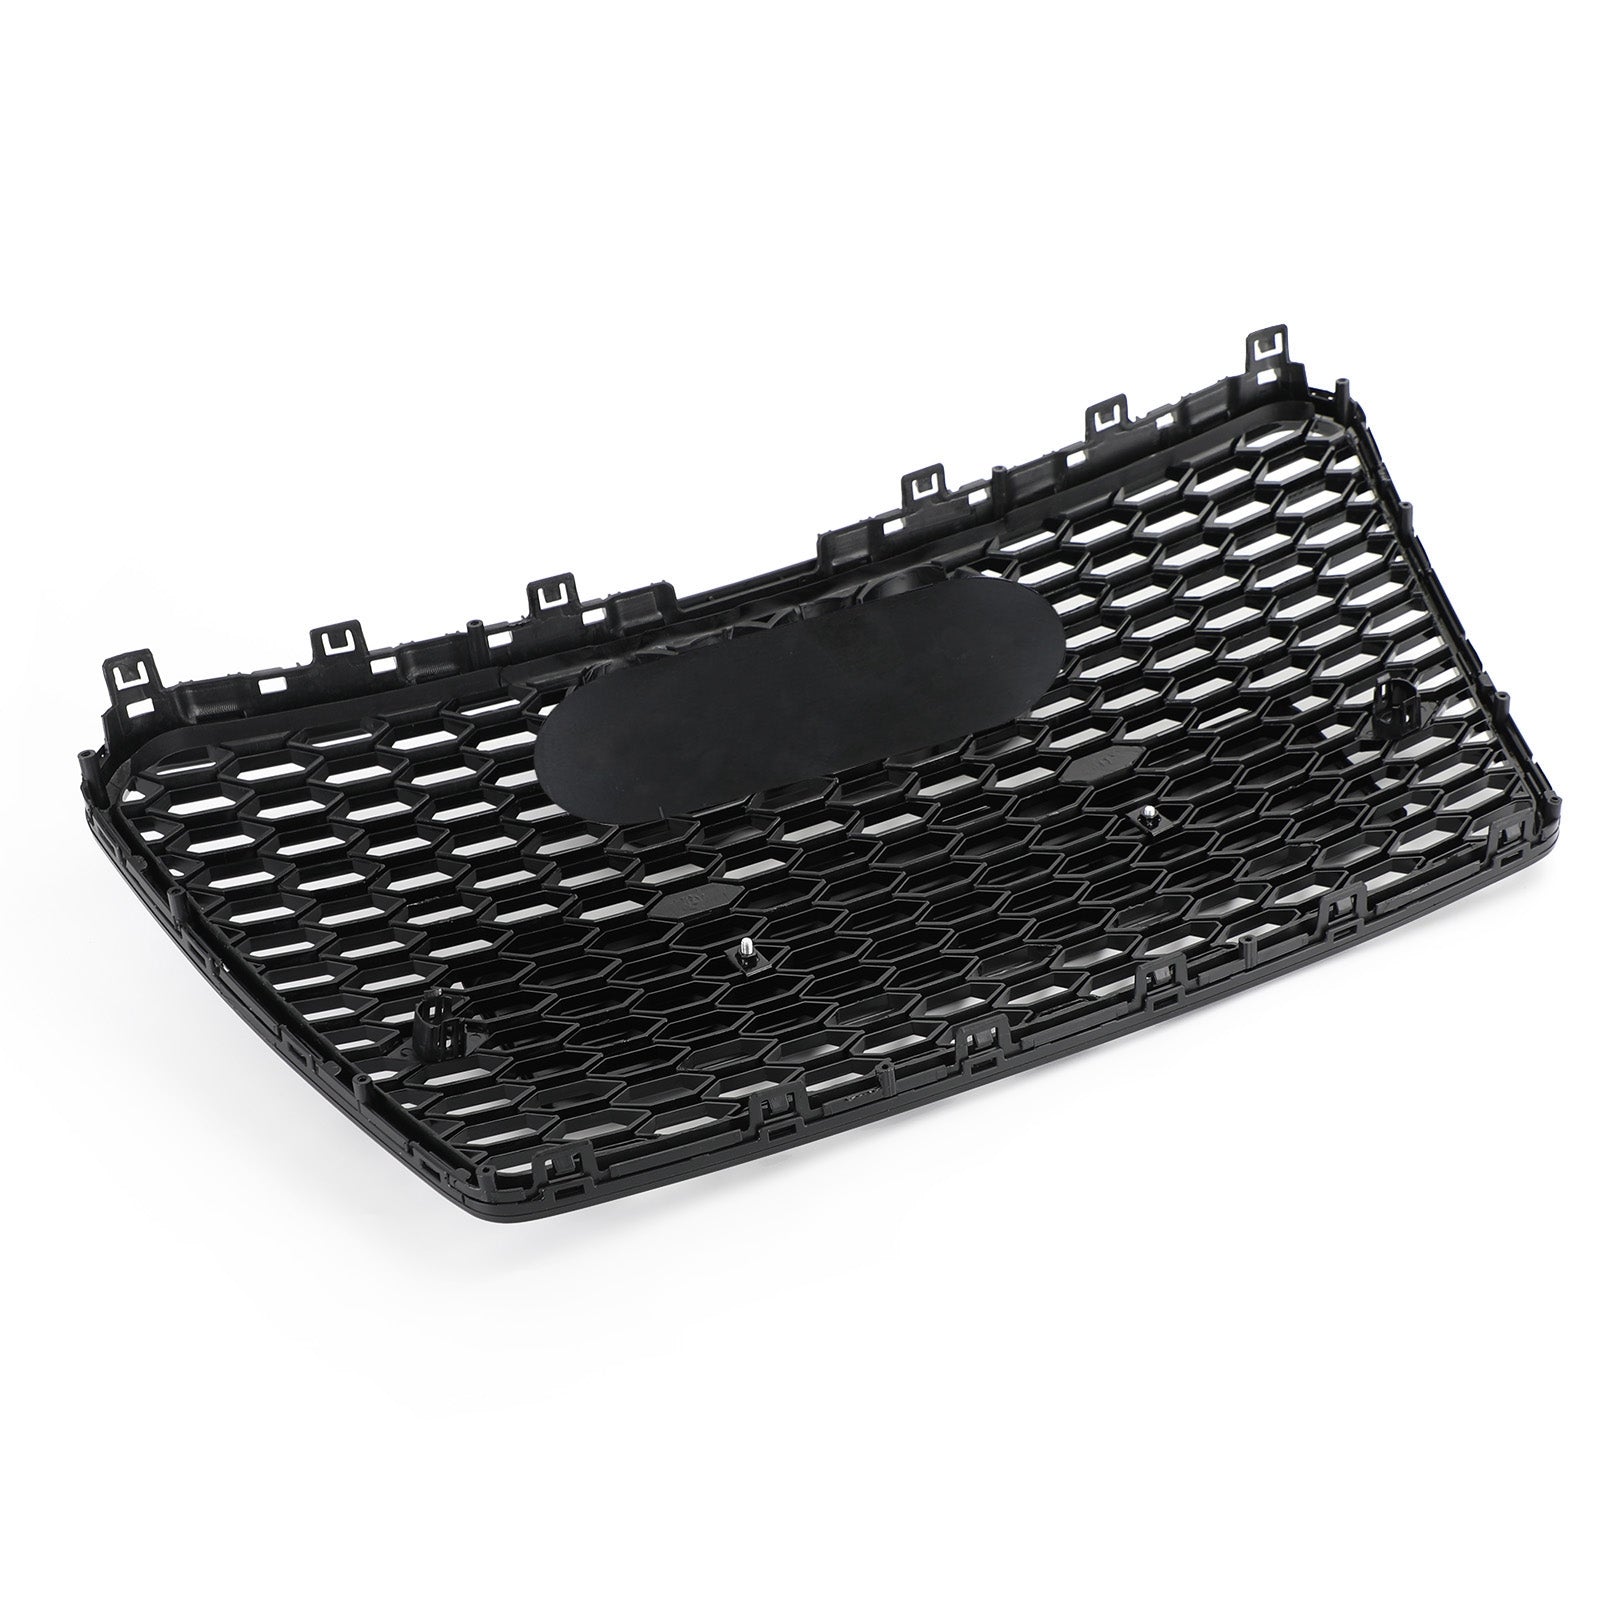 RS7 Style Honeycomb Sport Mesh Hex Grille Grill Fit Audi A7/S7 2012-2015 Black